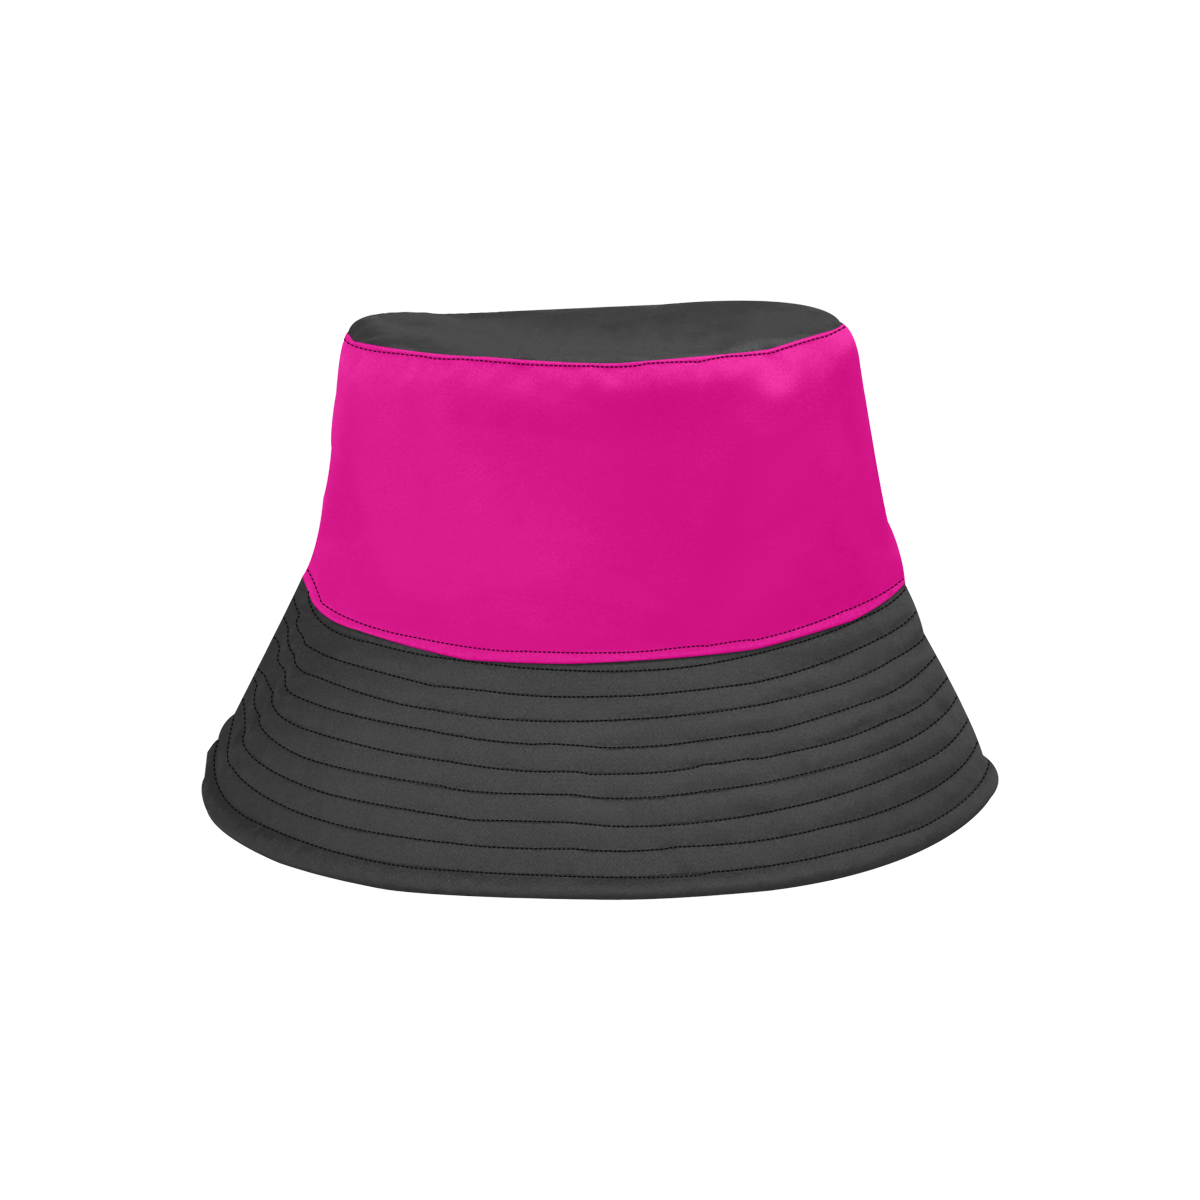 solid colors black and pink All Over Print Bucket Hat